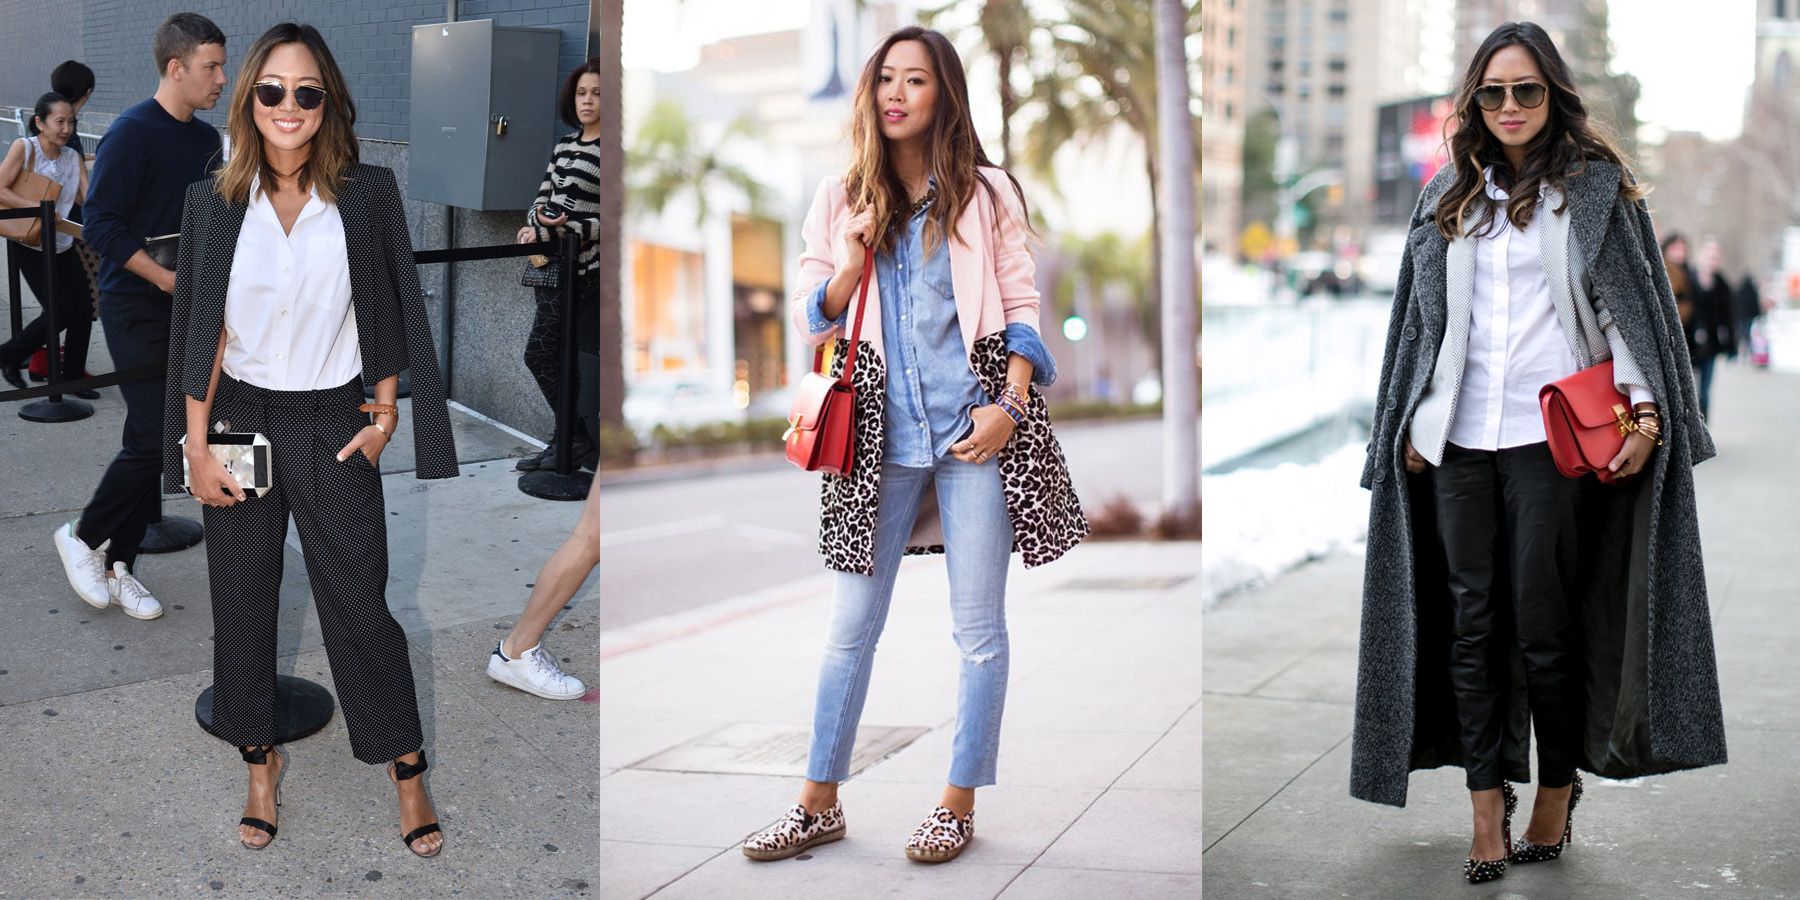 Chic and Stylish, This is Aimee Song's Dressing Trick!